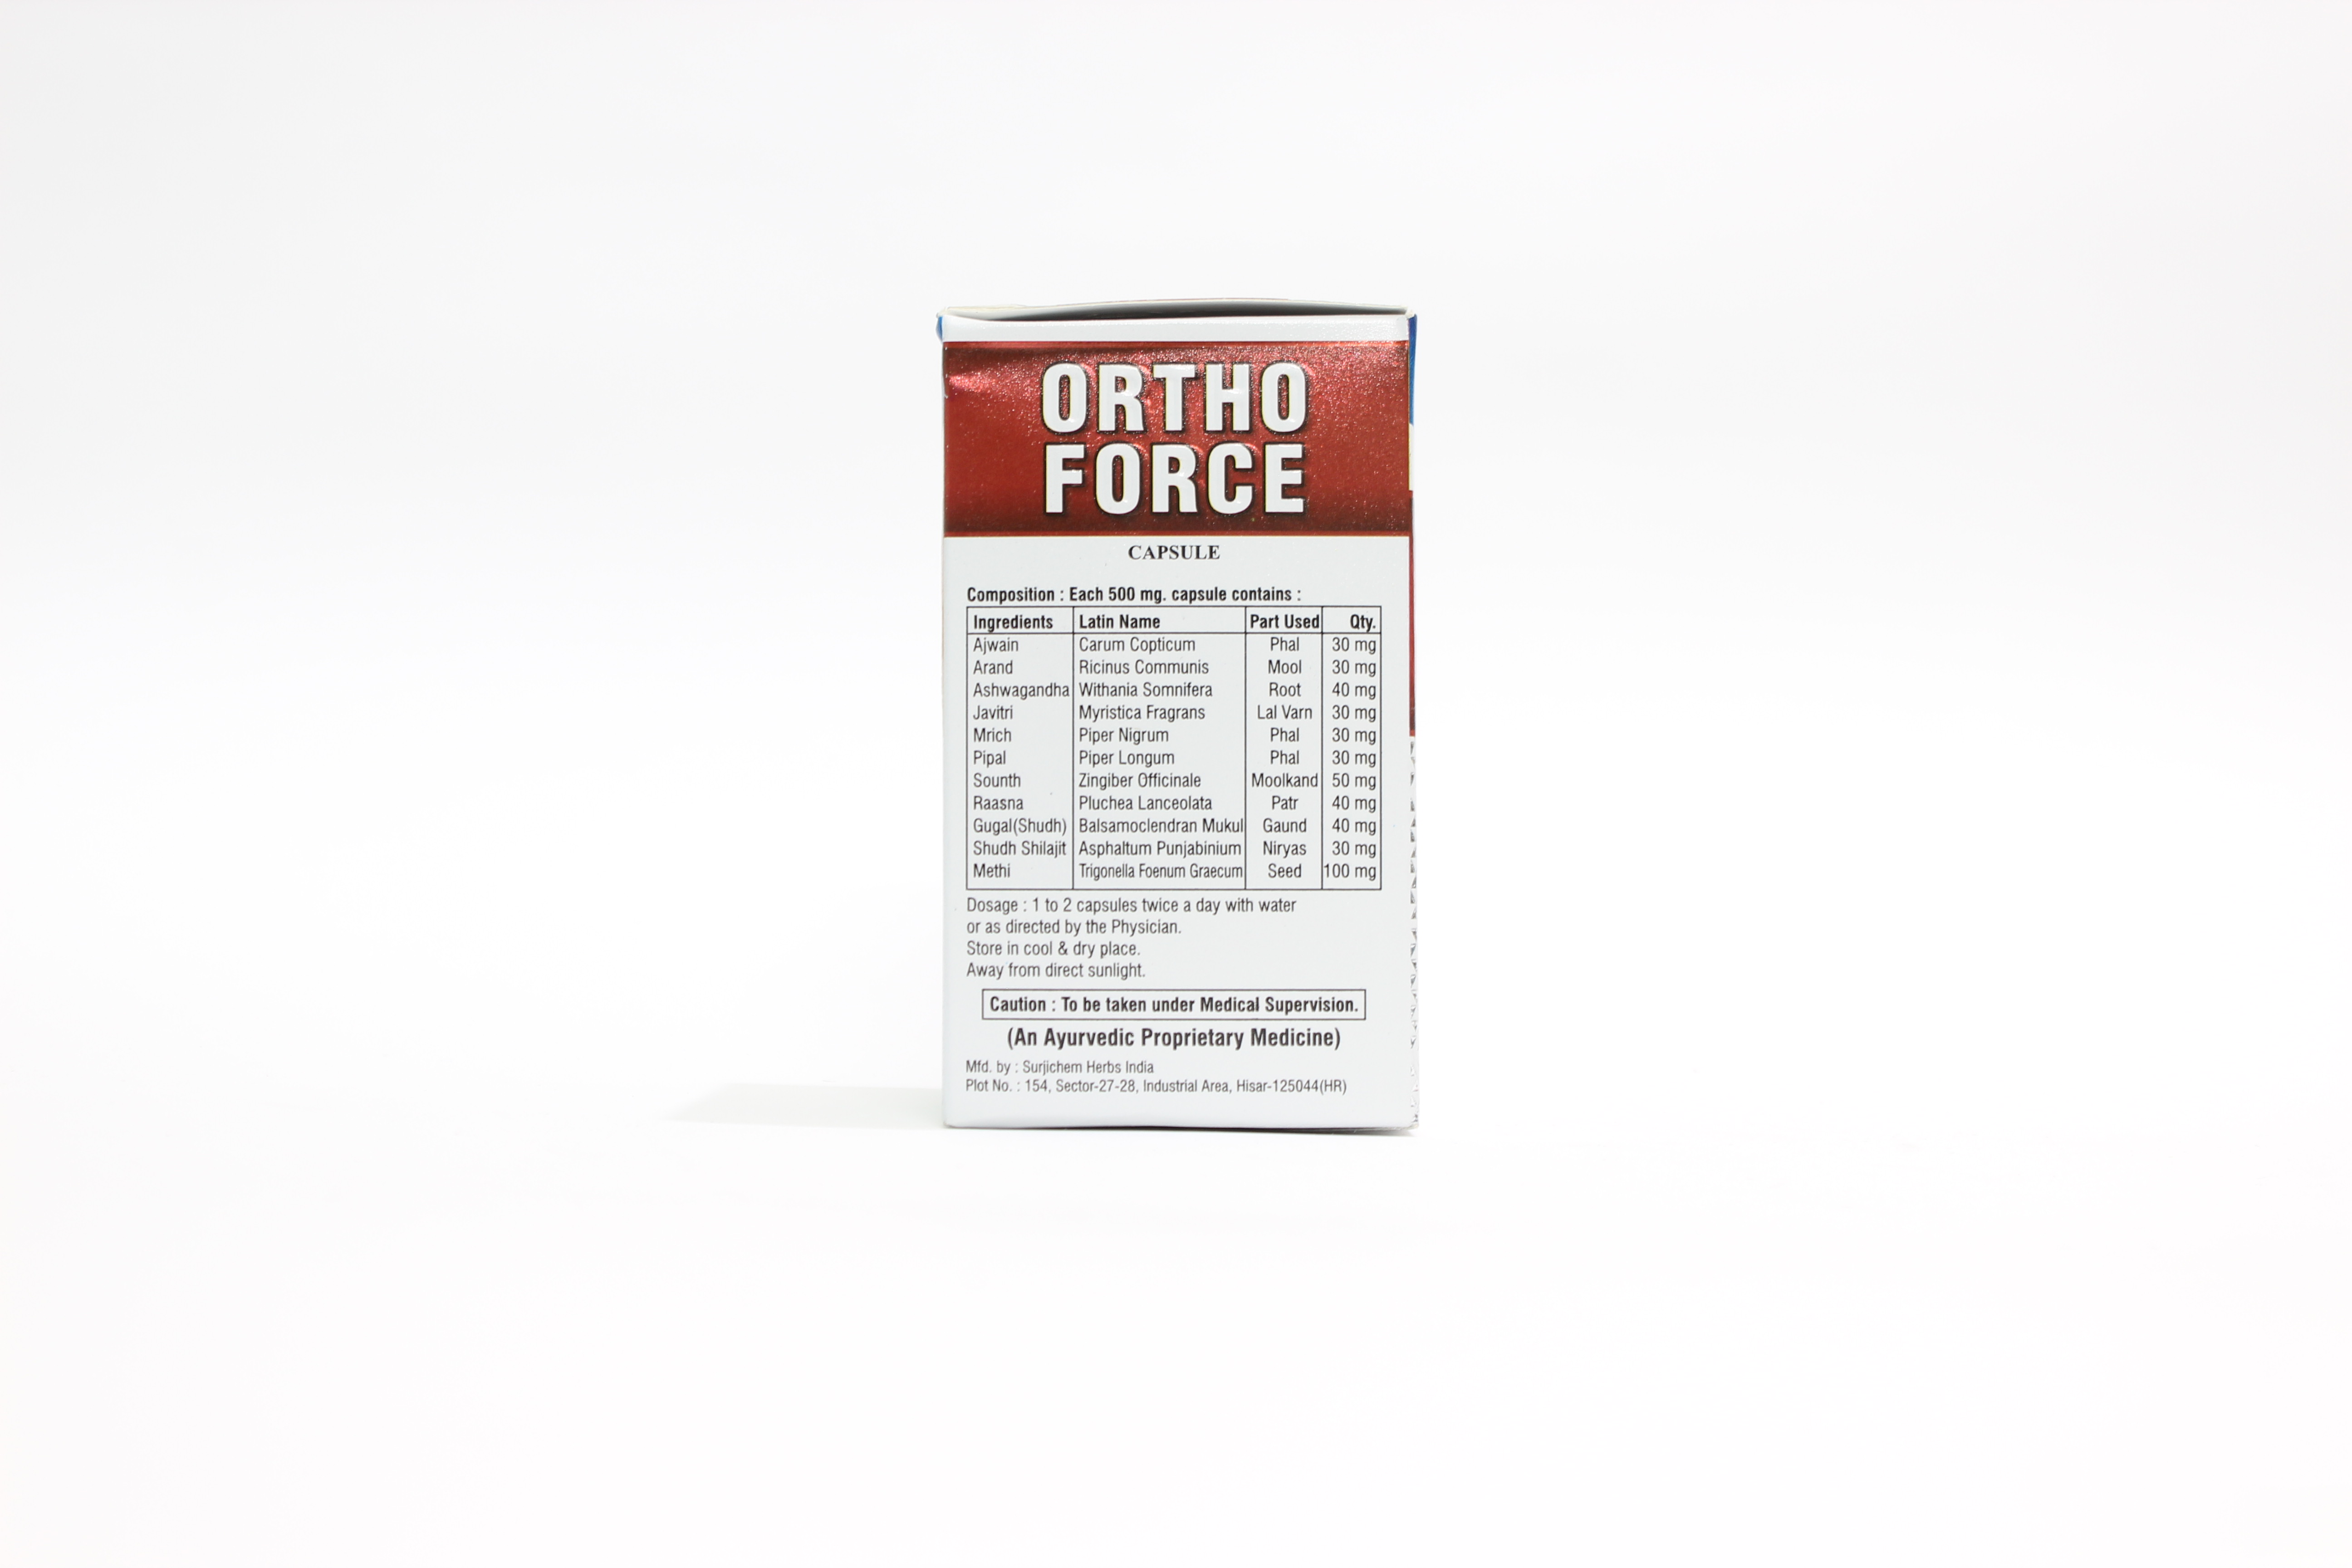 Buy Ortho Force Capsules at Best Price Online